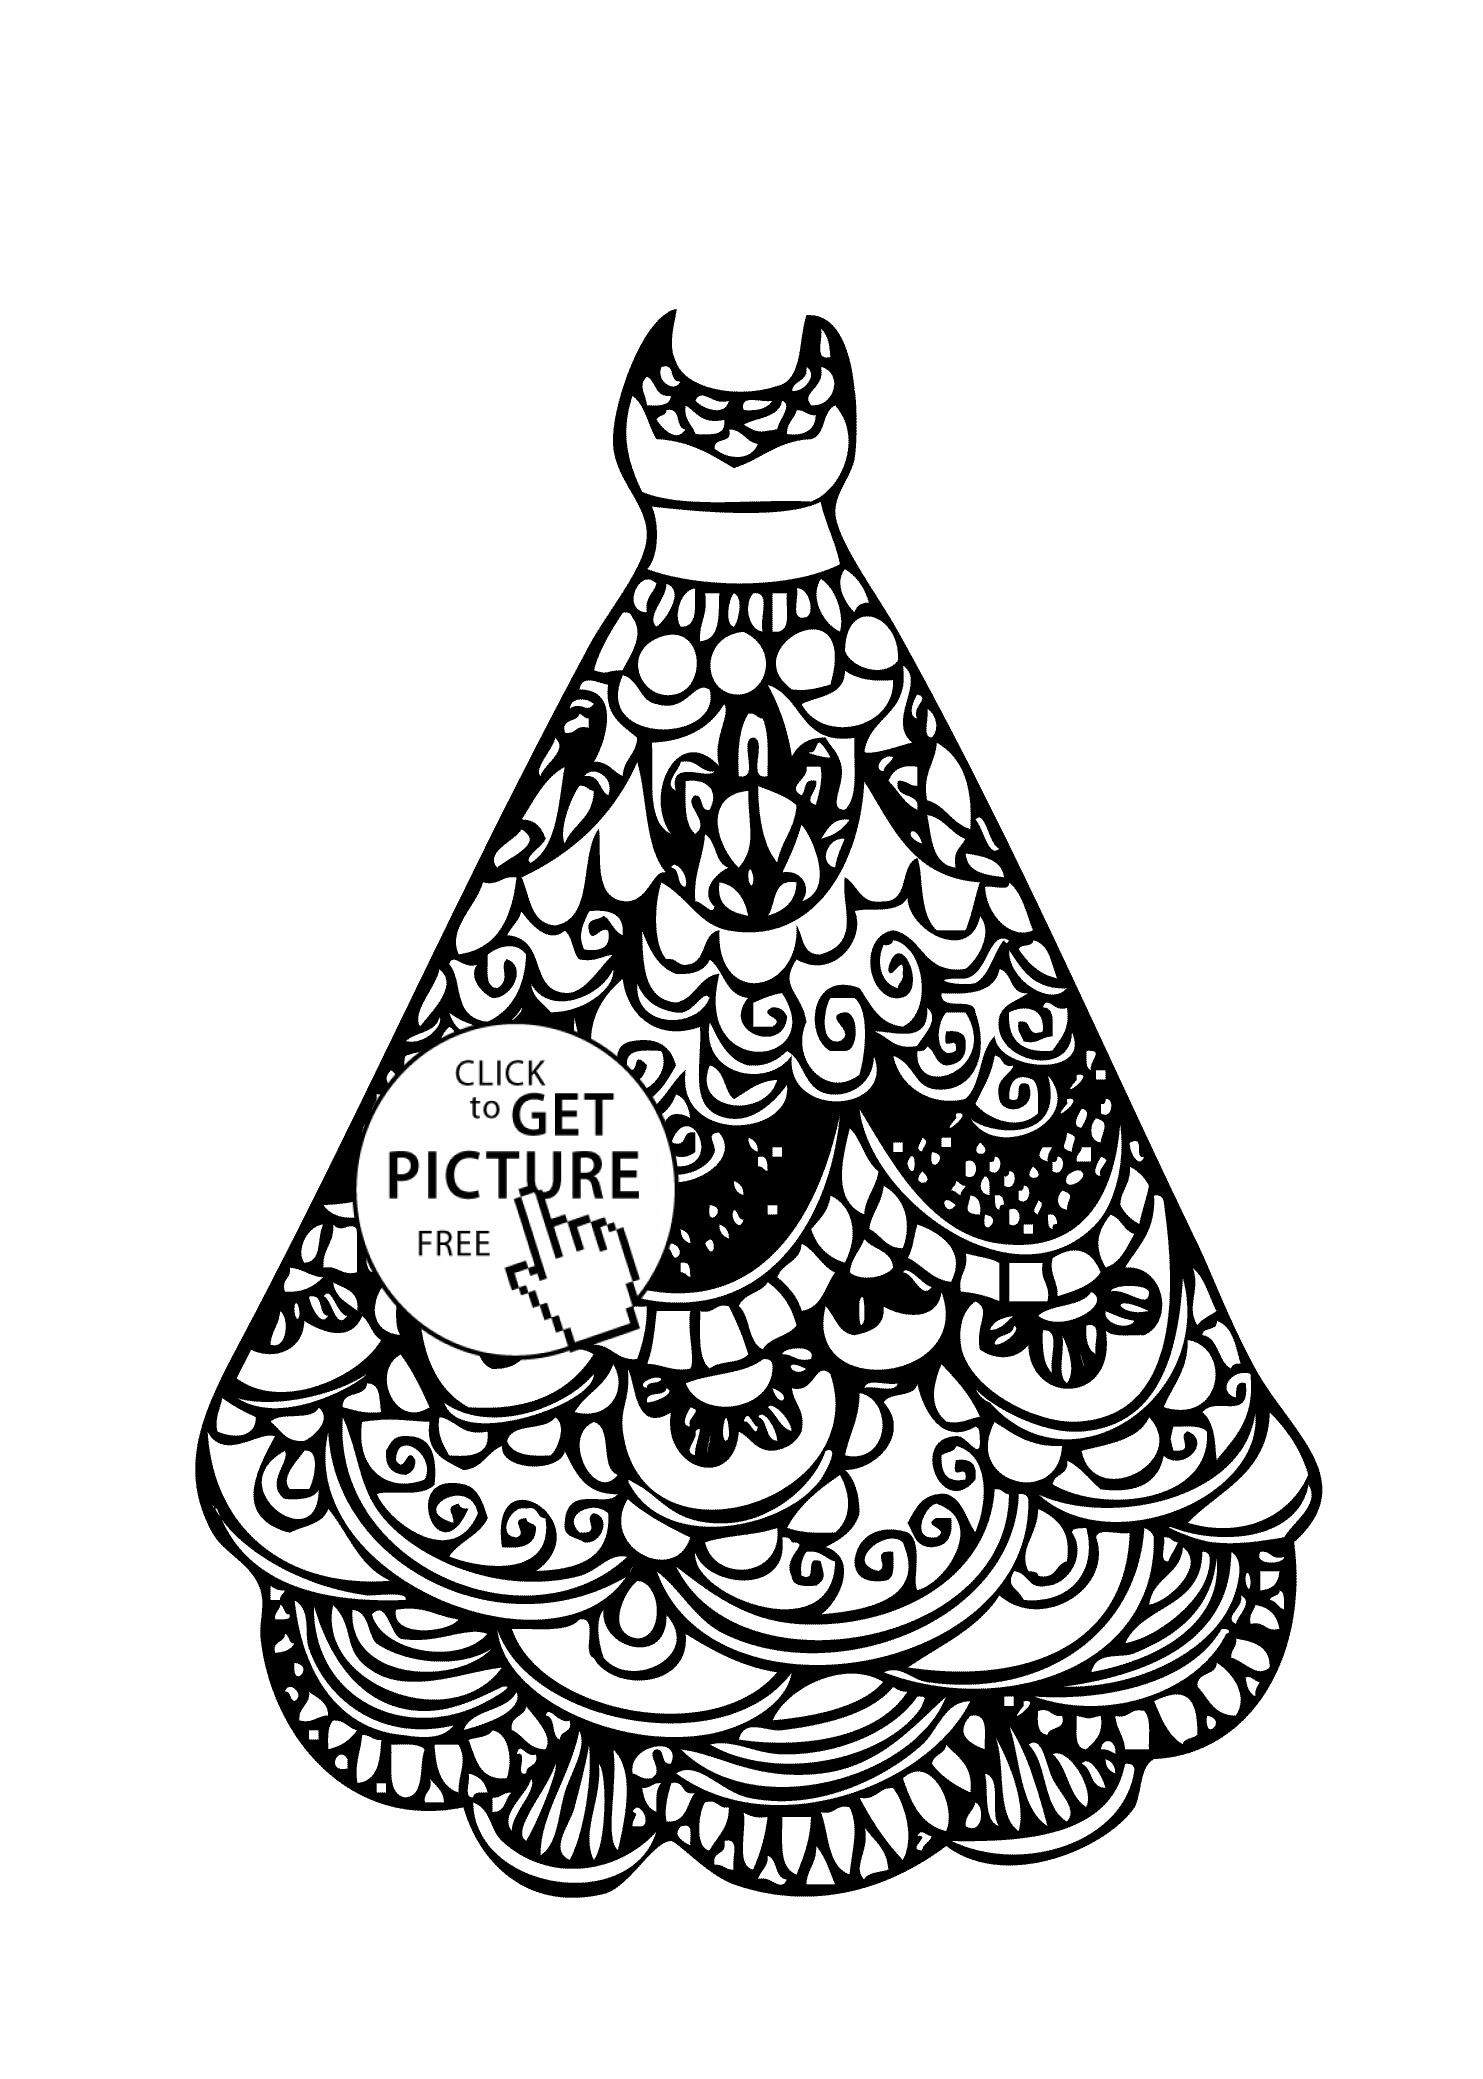 Coloring Pages Of Dresses
 Dress lace coloring page for girls printable free